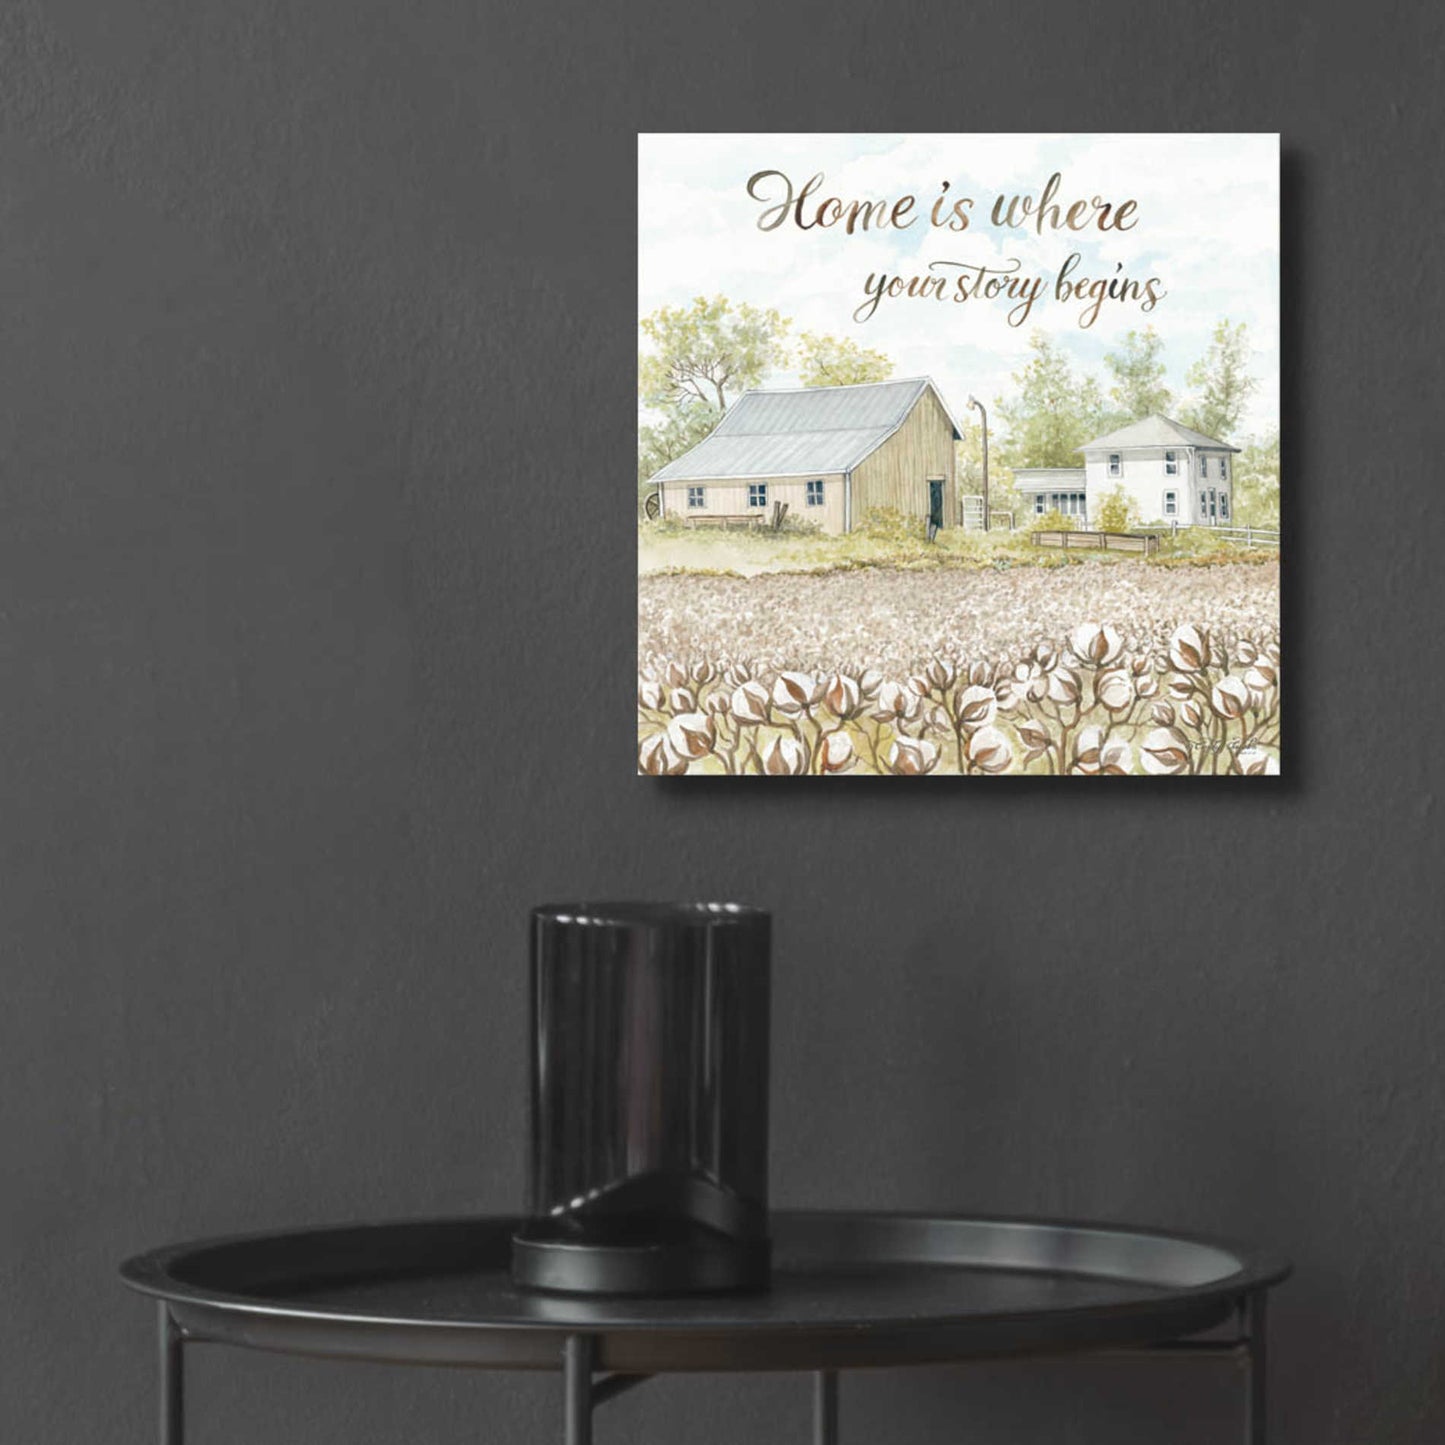 Epic Art 'Home Is Where Your Story Begins' by Cindy Jacobs, Acrylic Glass Wall Art,12x12